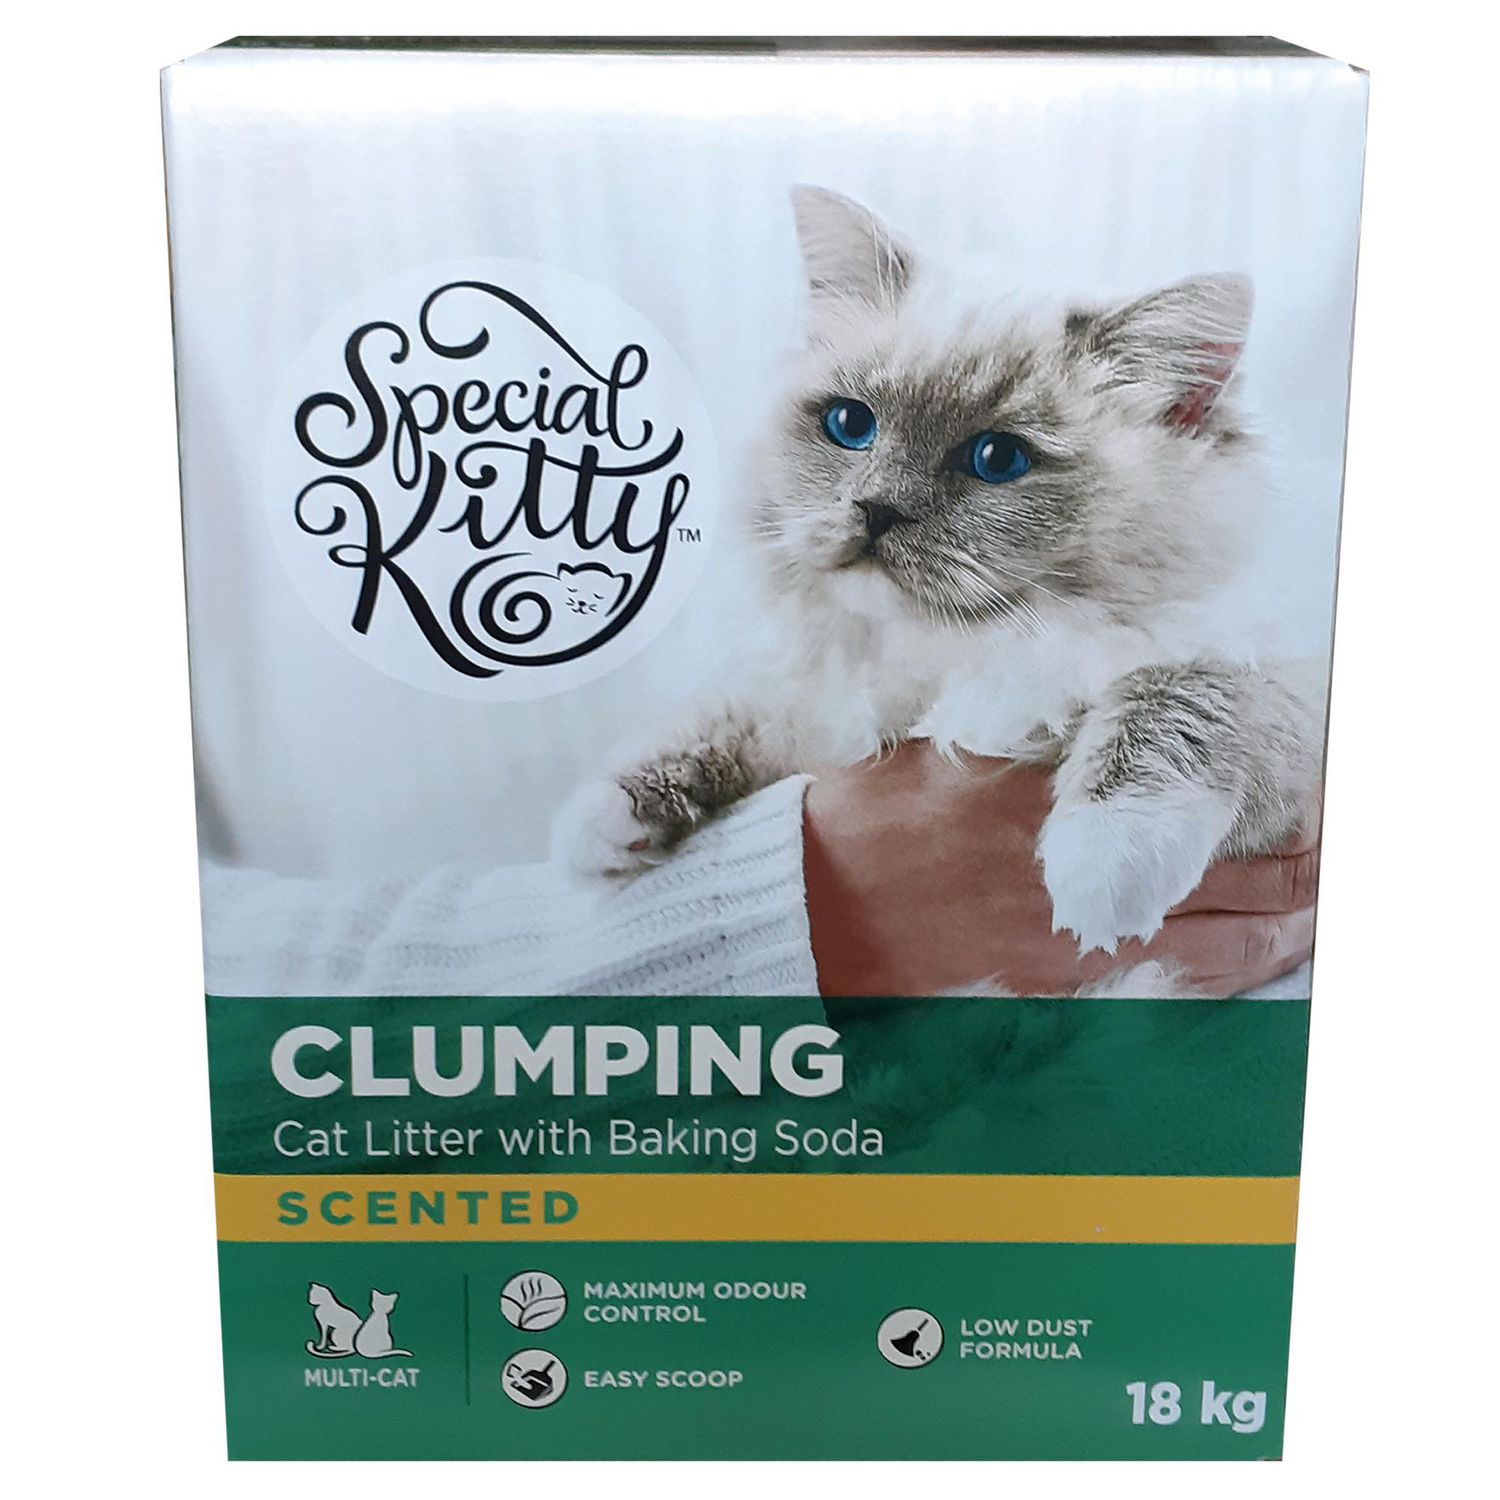 Special Kitty Clumping Cat Litter with Baking Soda, Scented Walmart